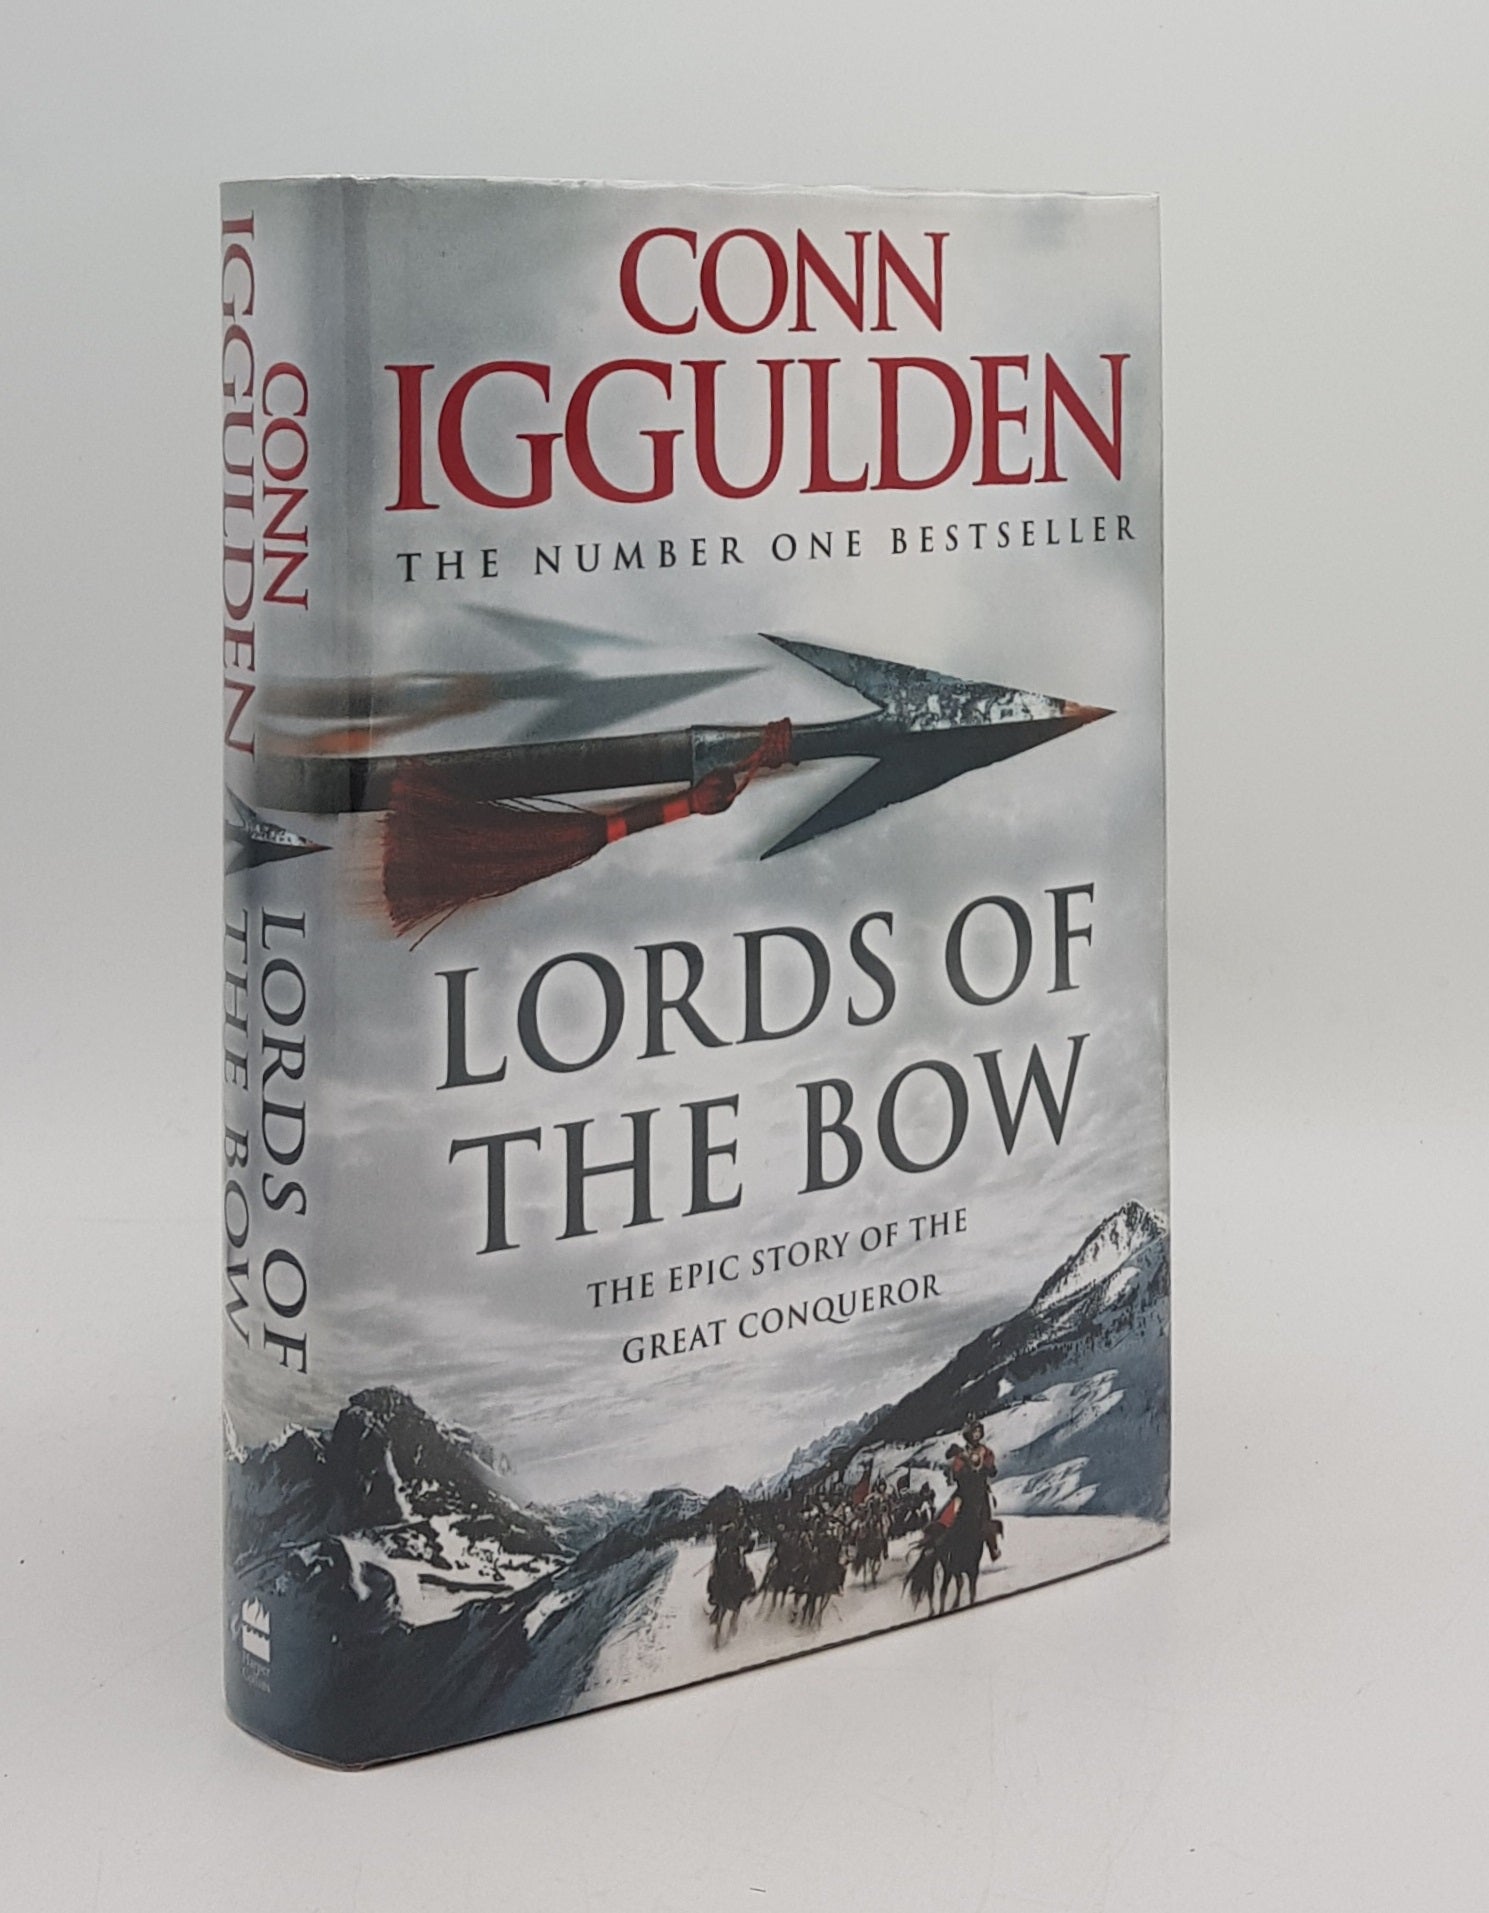 IGGULDEN Conn - Lords of the Bow the Epic Story of the Great Conqueror